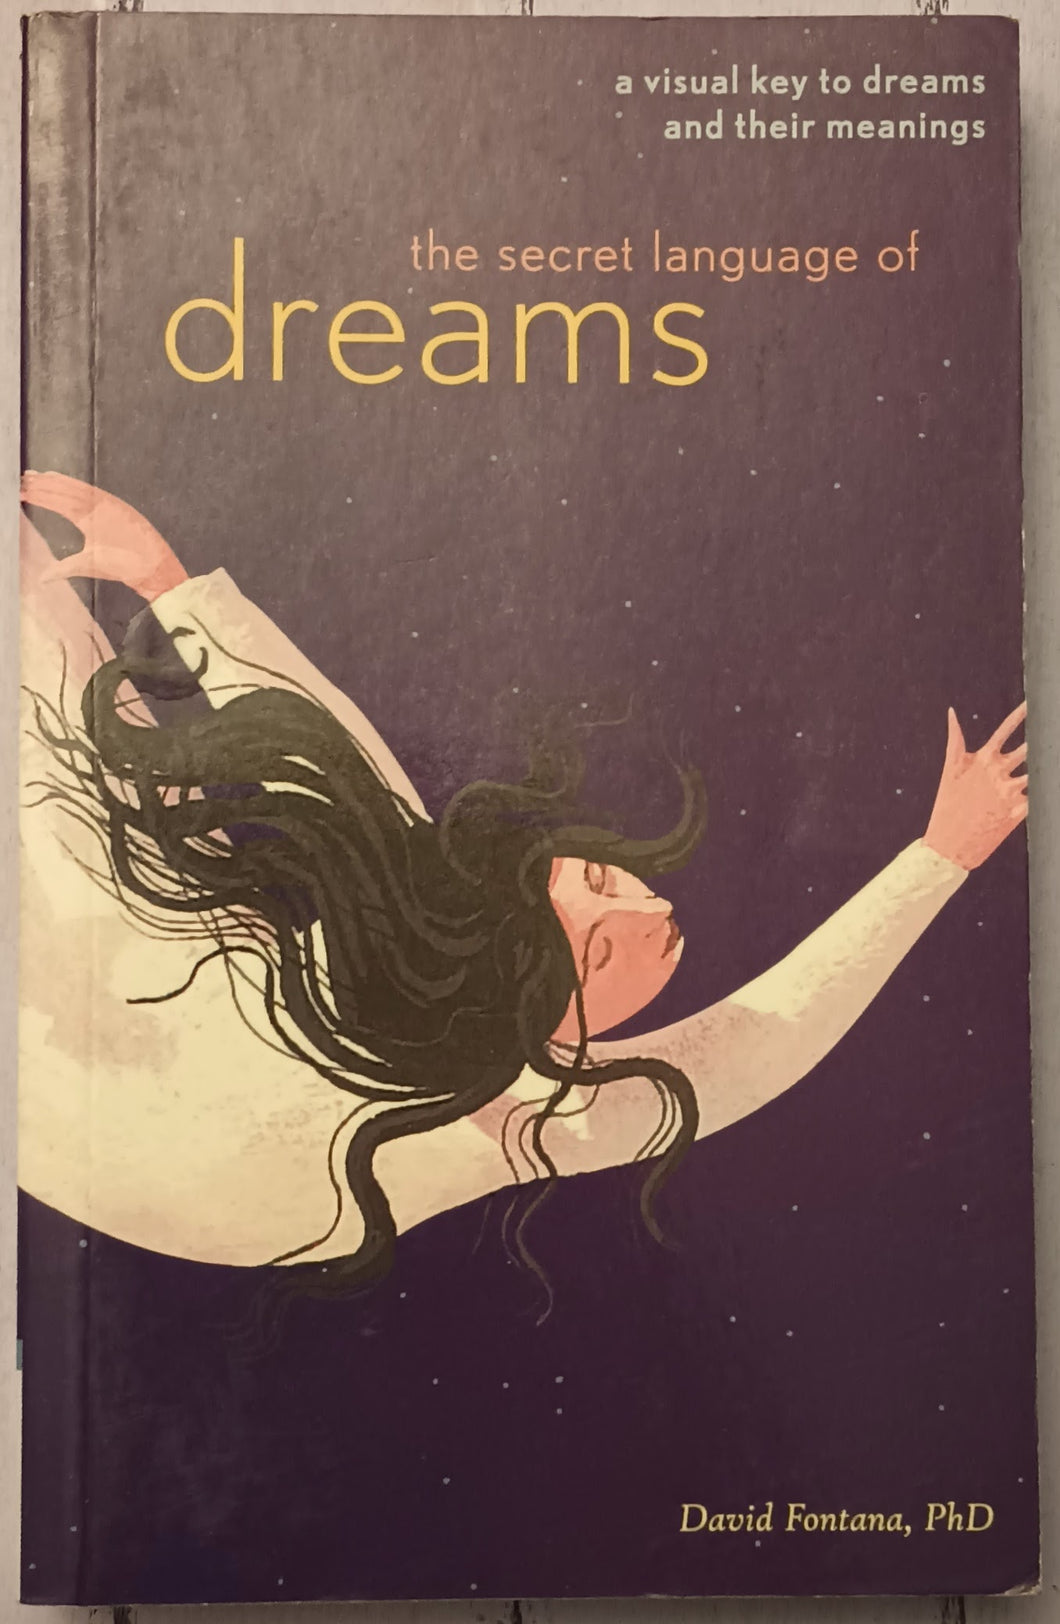 The Secret Language of Dreams: A Visual Key to Dreams and Their Meanings